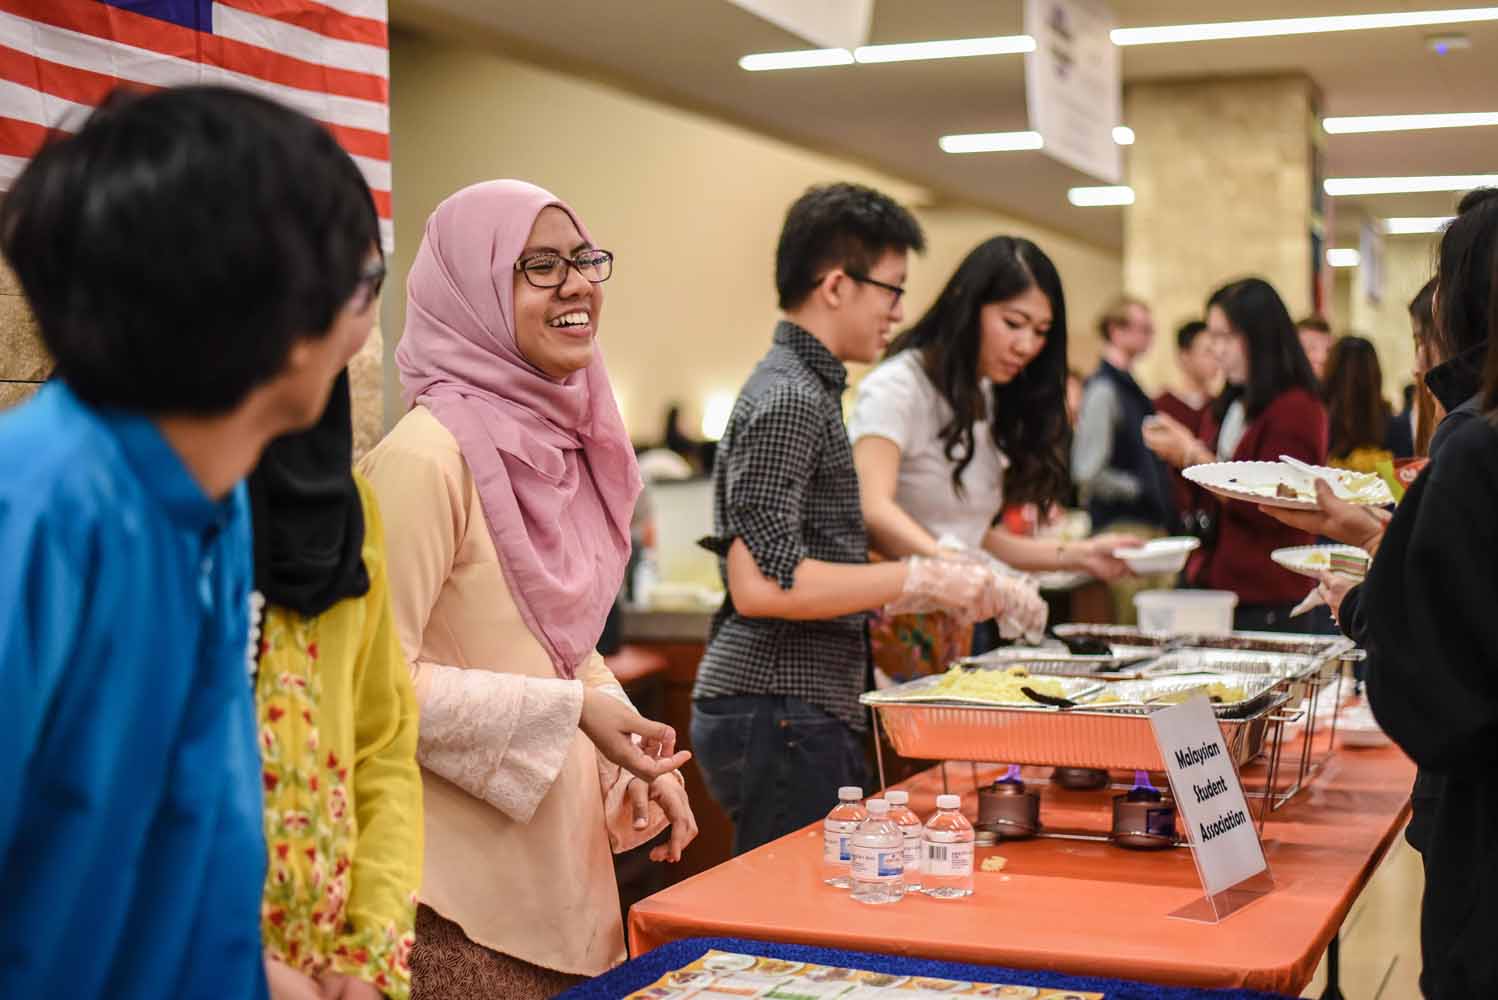 Nasyitah Indra joined several other members of the Malaysian Student Organization at the International Welcome Party on Saturday, February 6, 2016. (Photo by Morgan Lieberman)